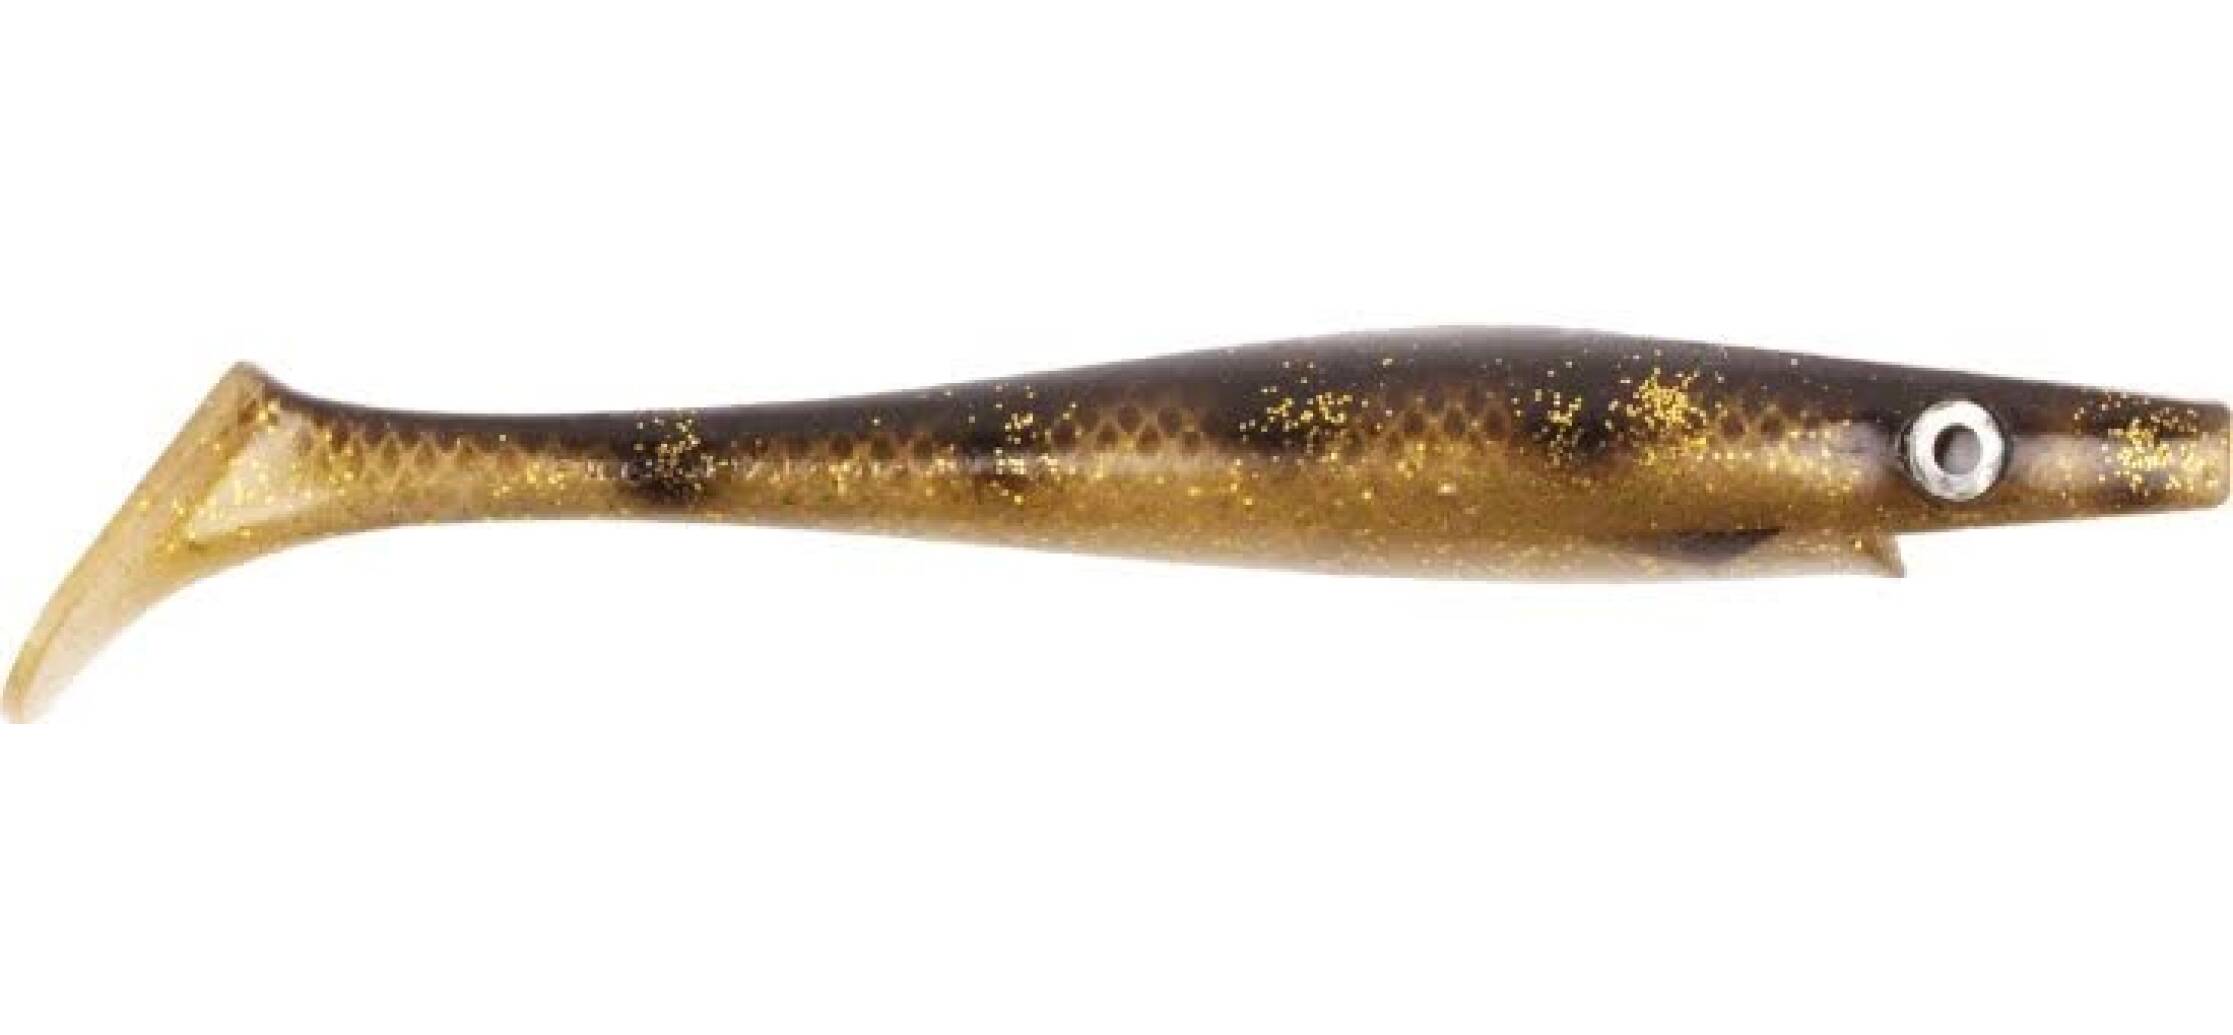 Giant Pig Tail, 40cm, 130g - Spotted Bullhead